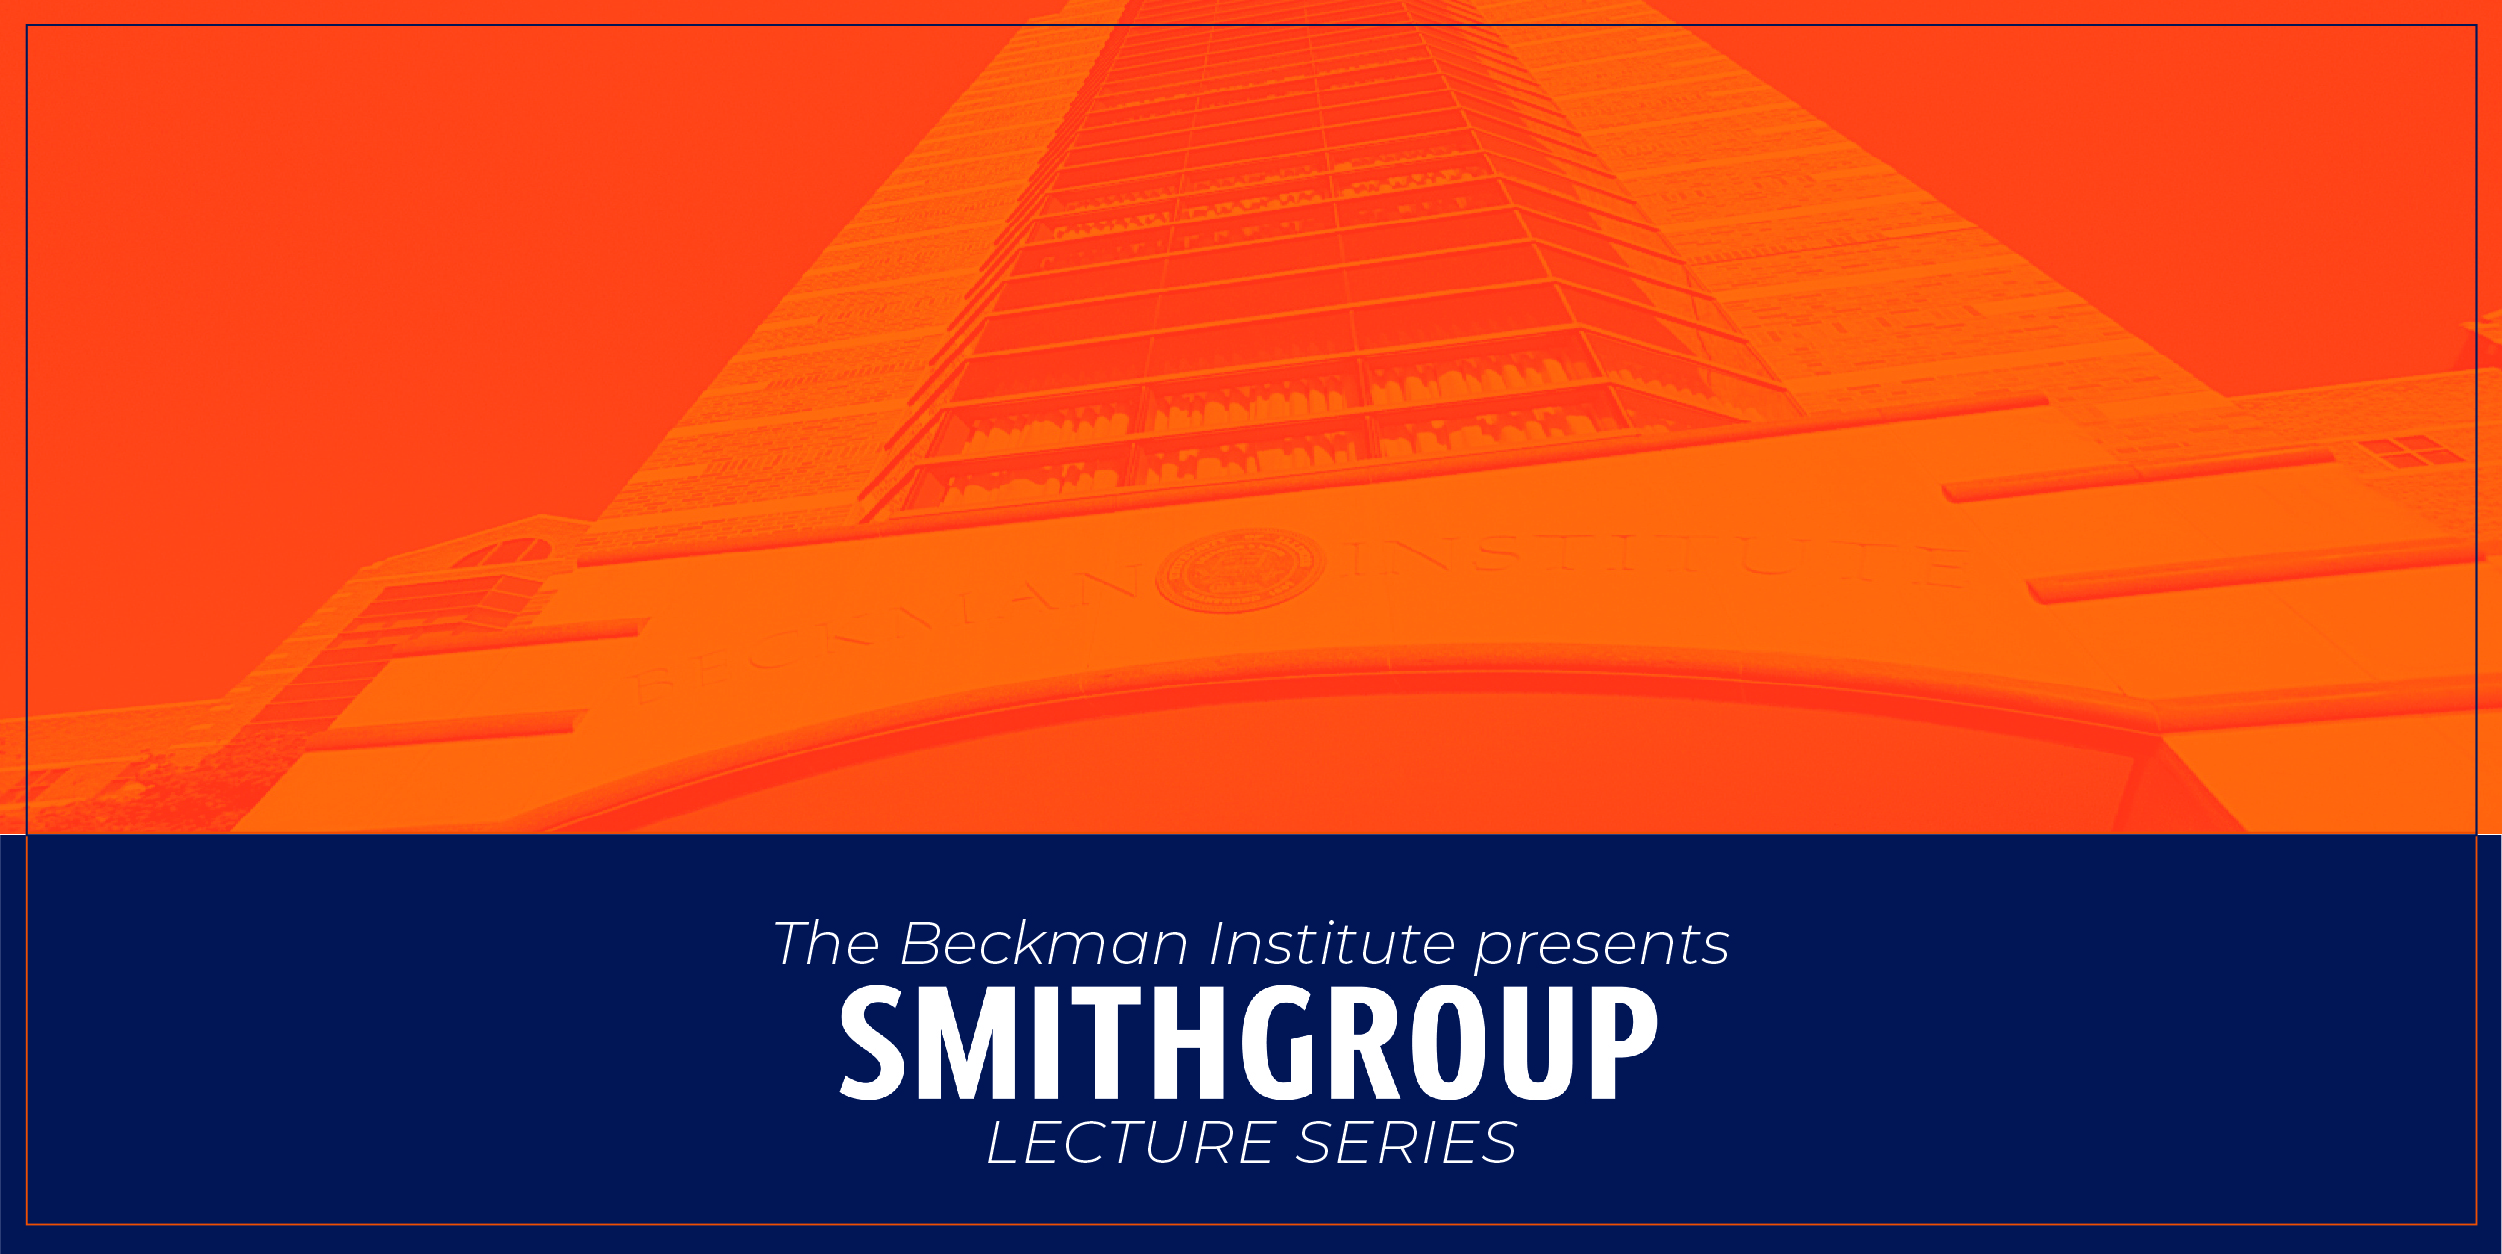 The Beckman Institute presents: the SmithGroup Lecture Series